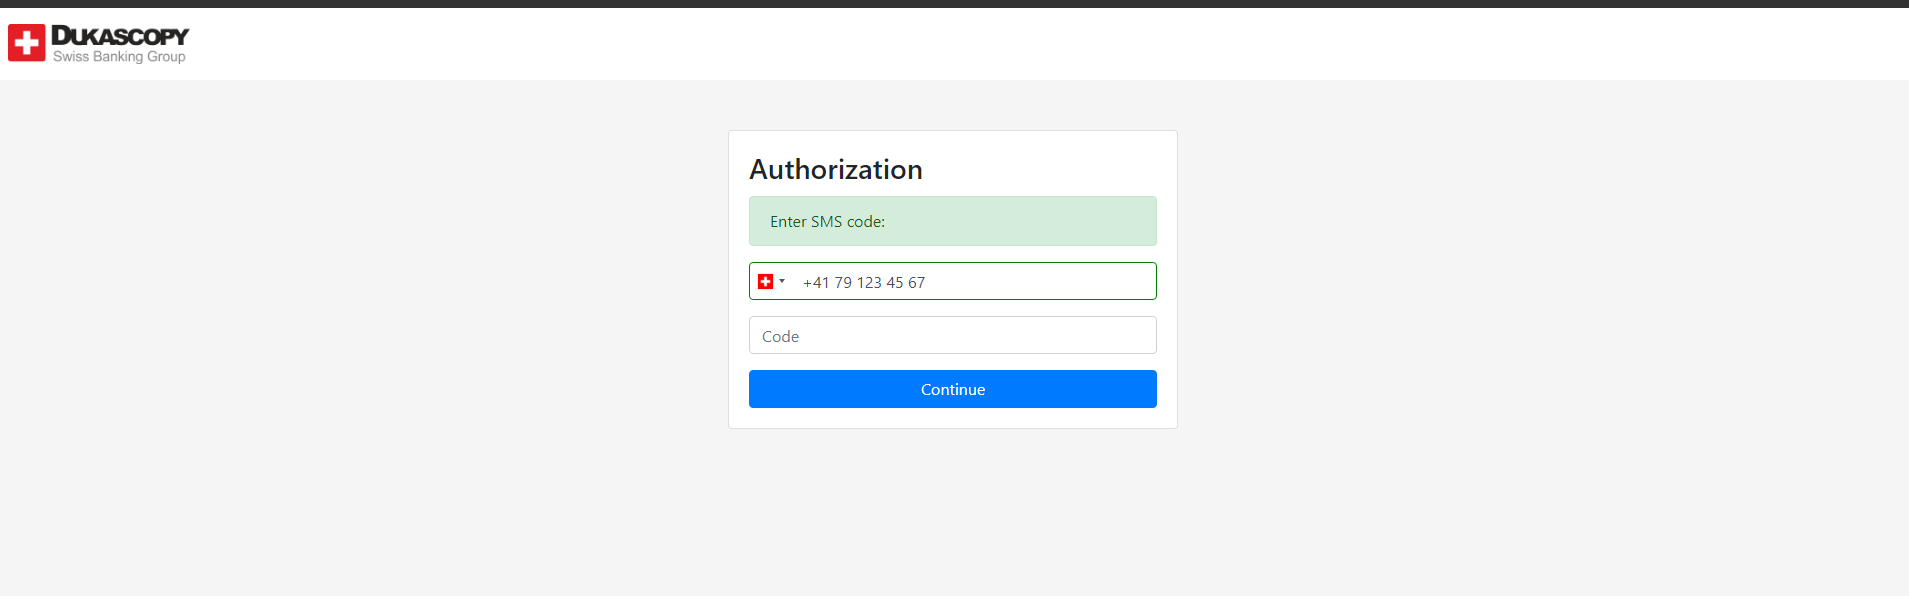 Sign in with your Dukascopy credentials